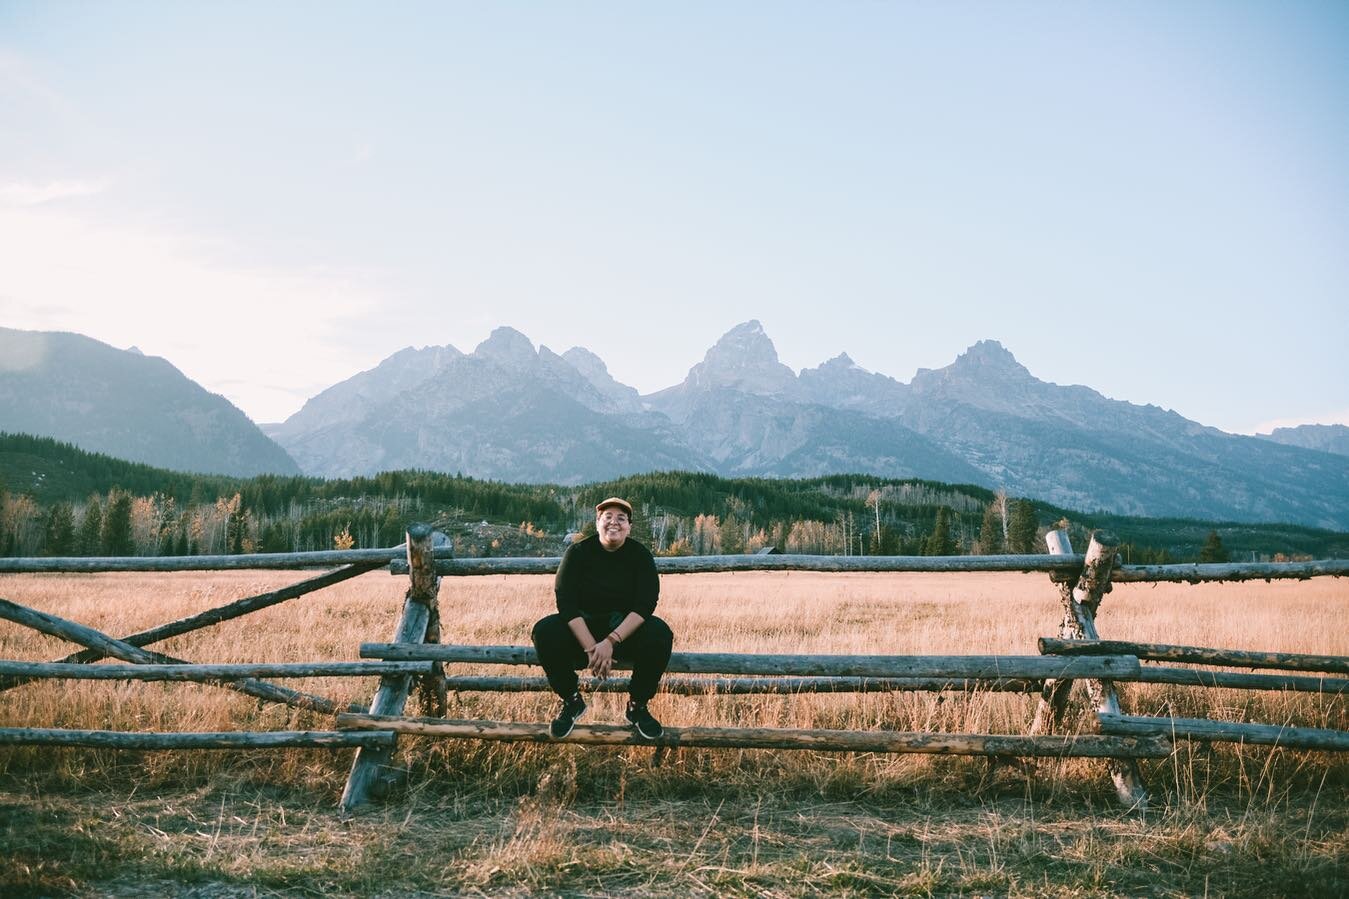 grand tetons are a must